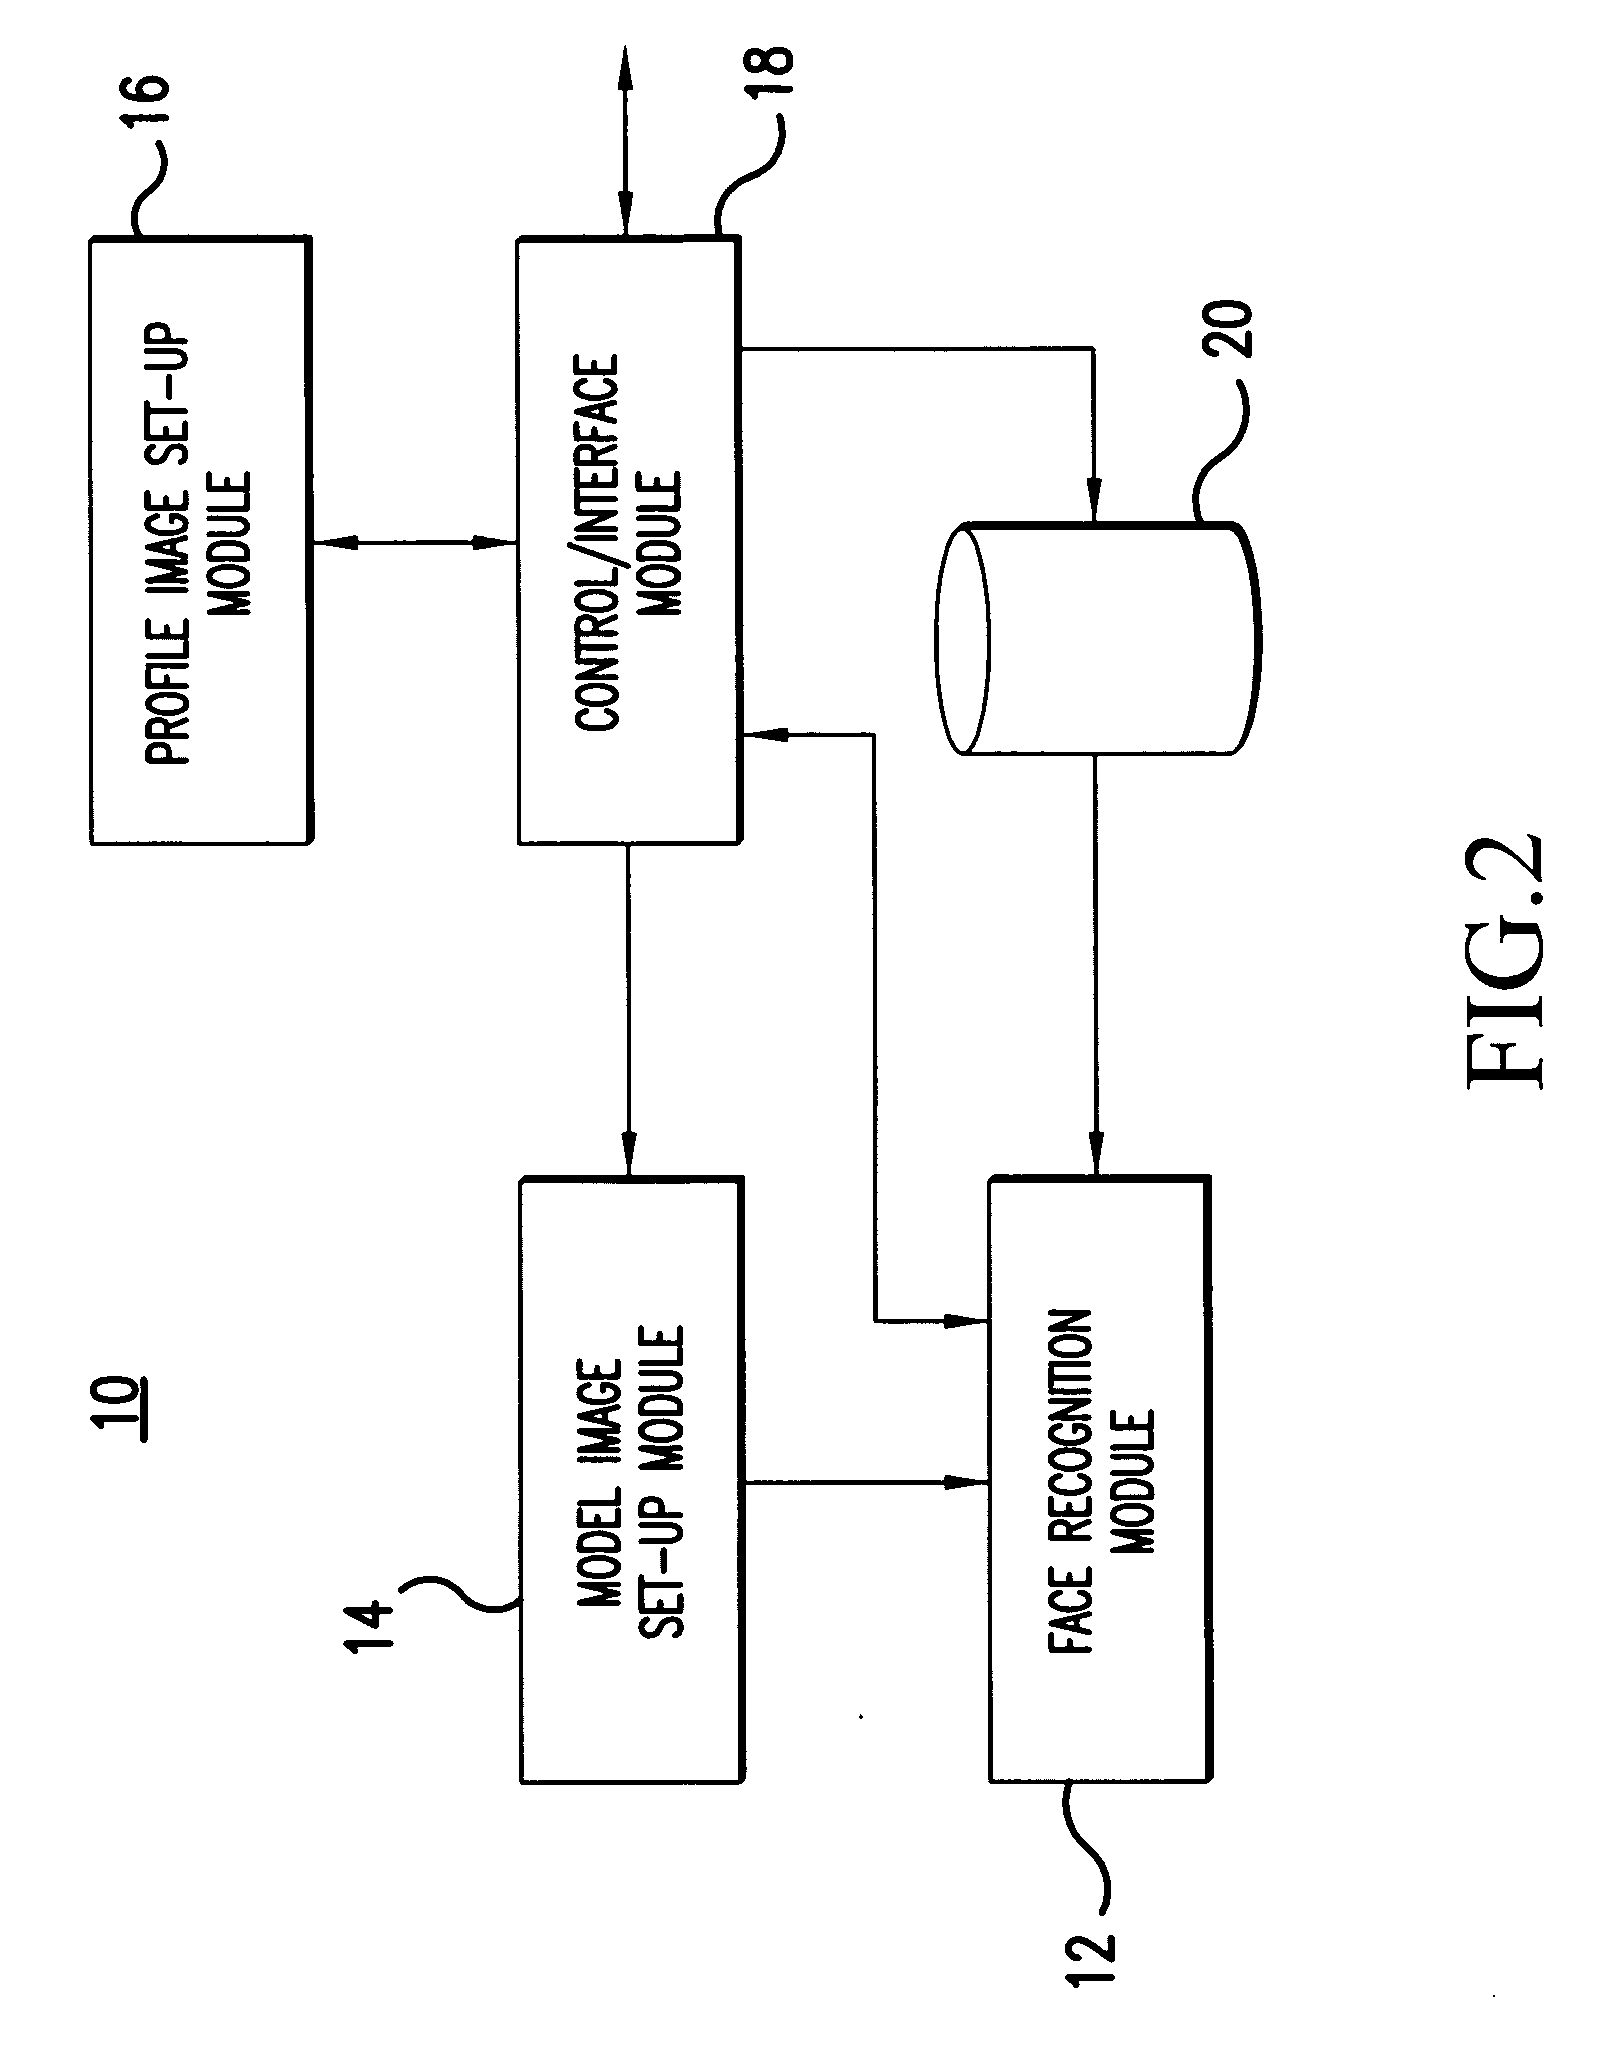 System and method applying image-based face recognition for online profile browsing